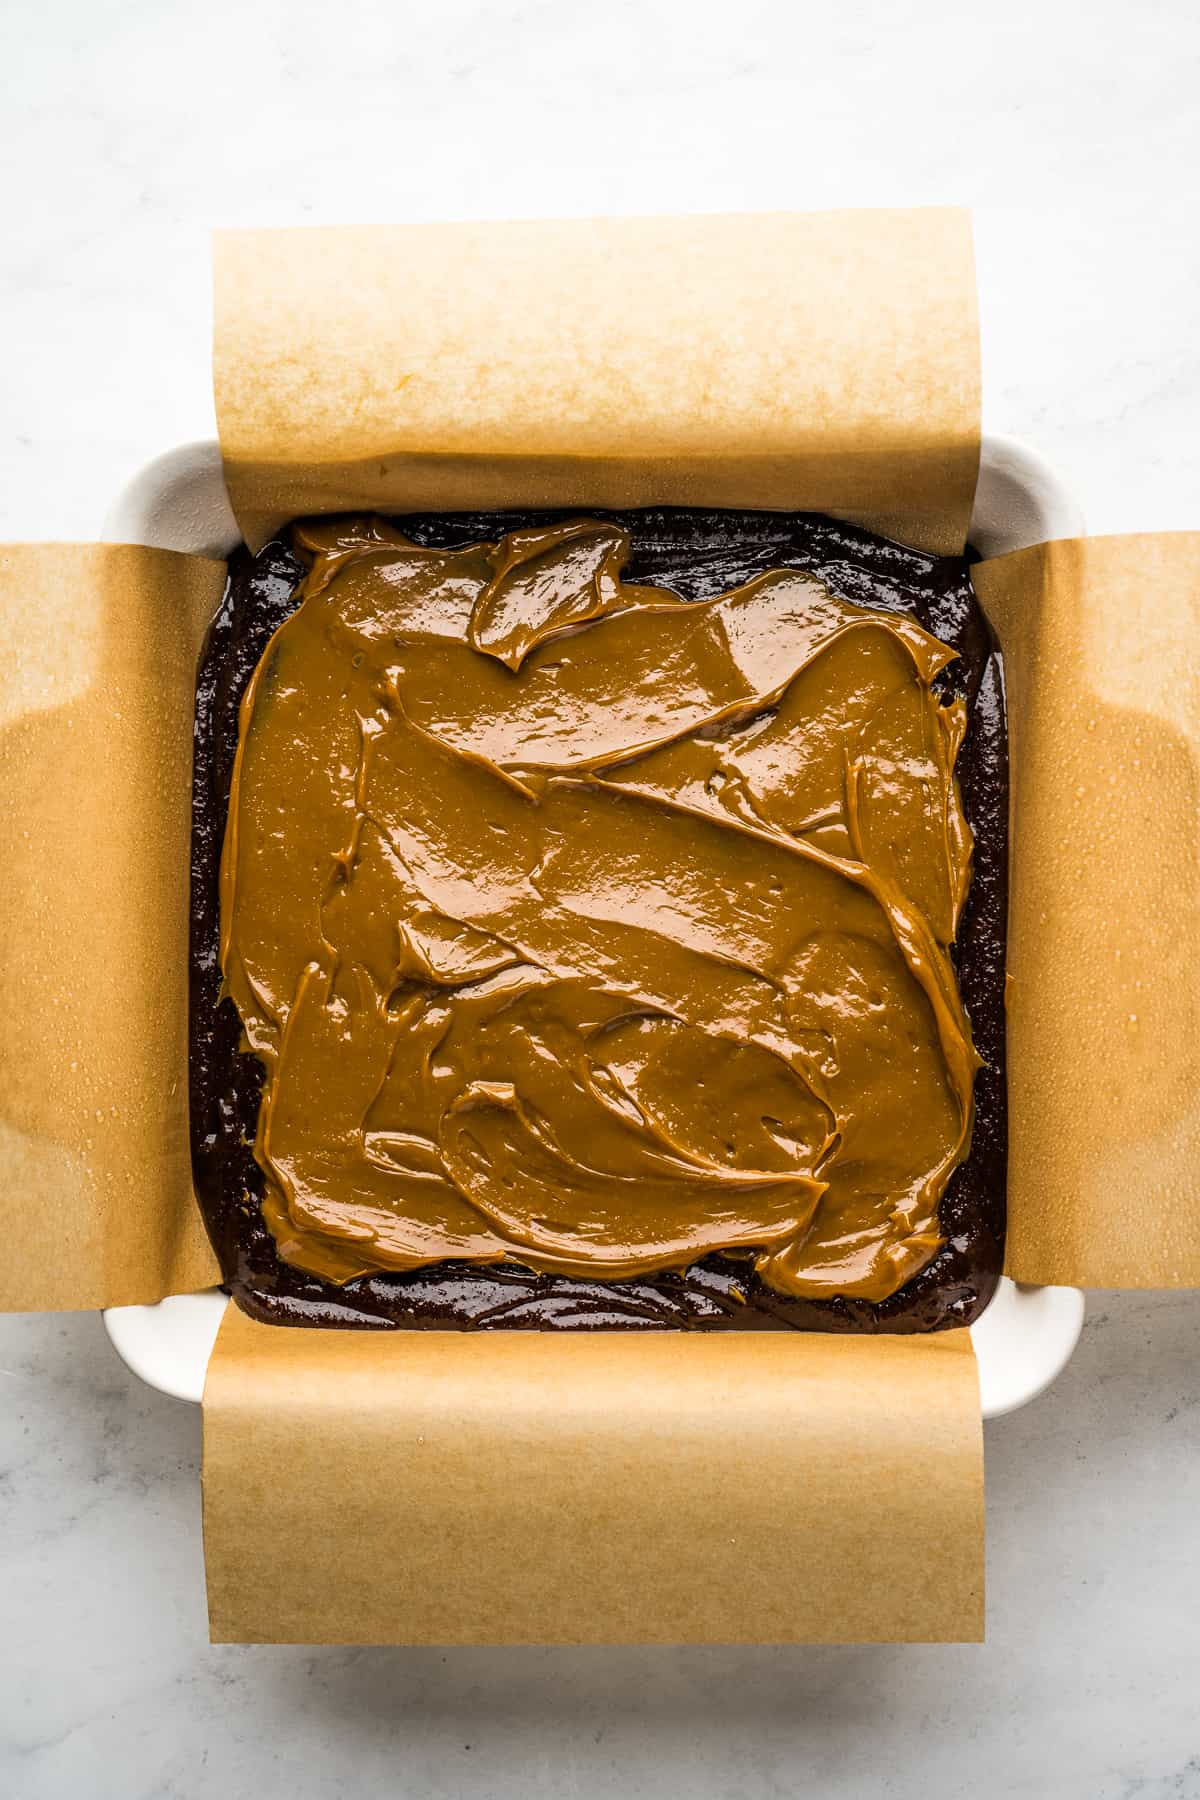 Brownie batter topped with a layer of dulce de leche on top in a square baking pan